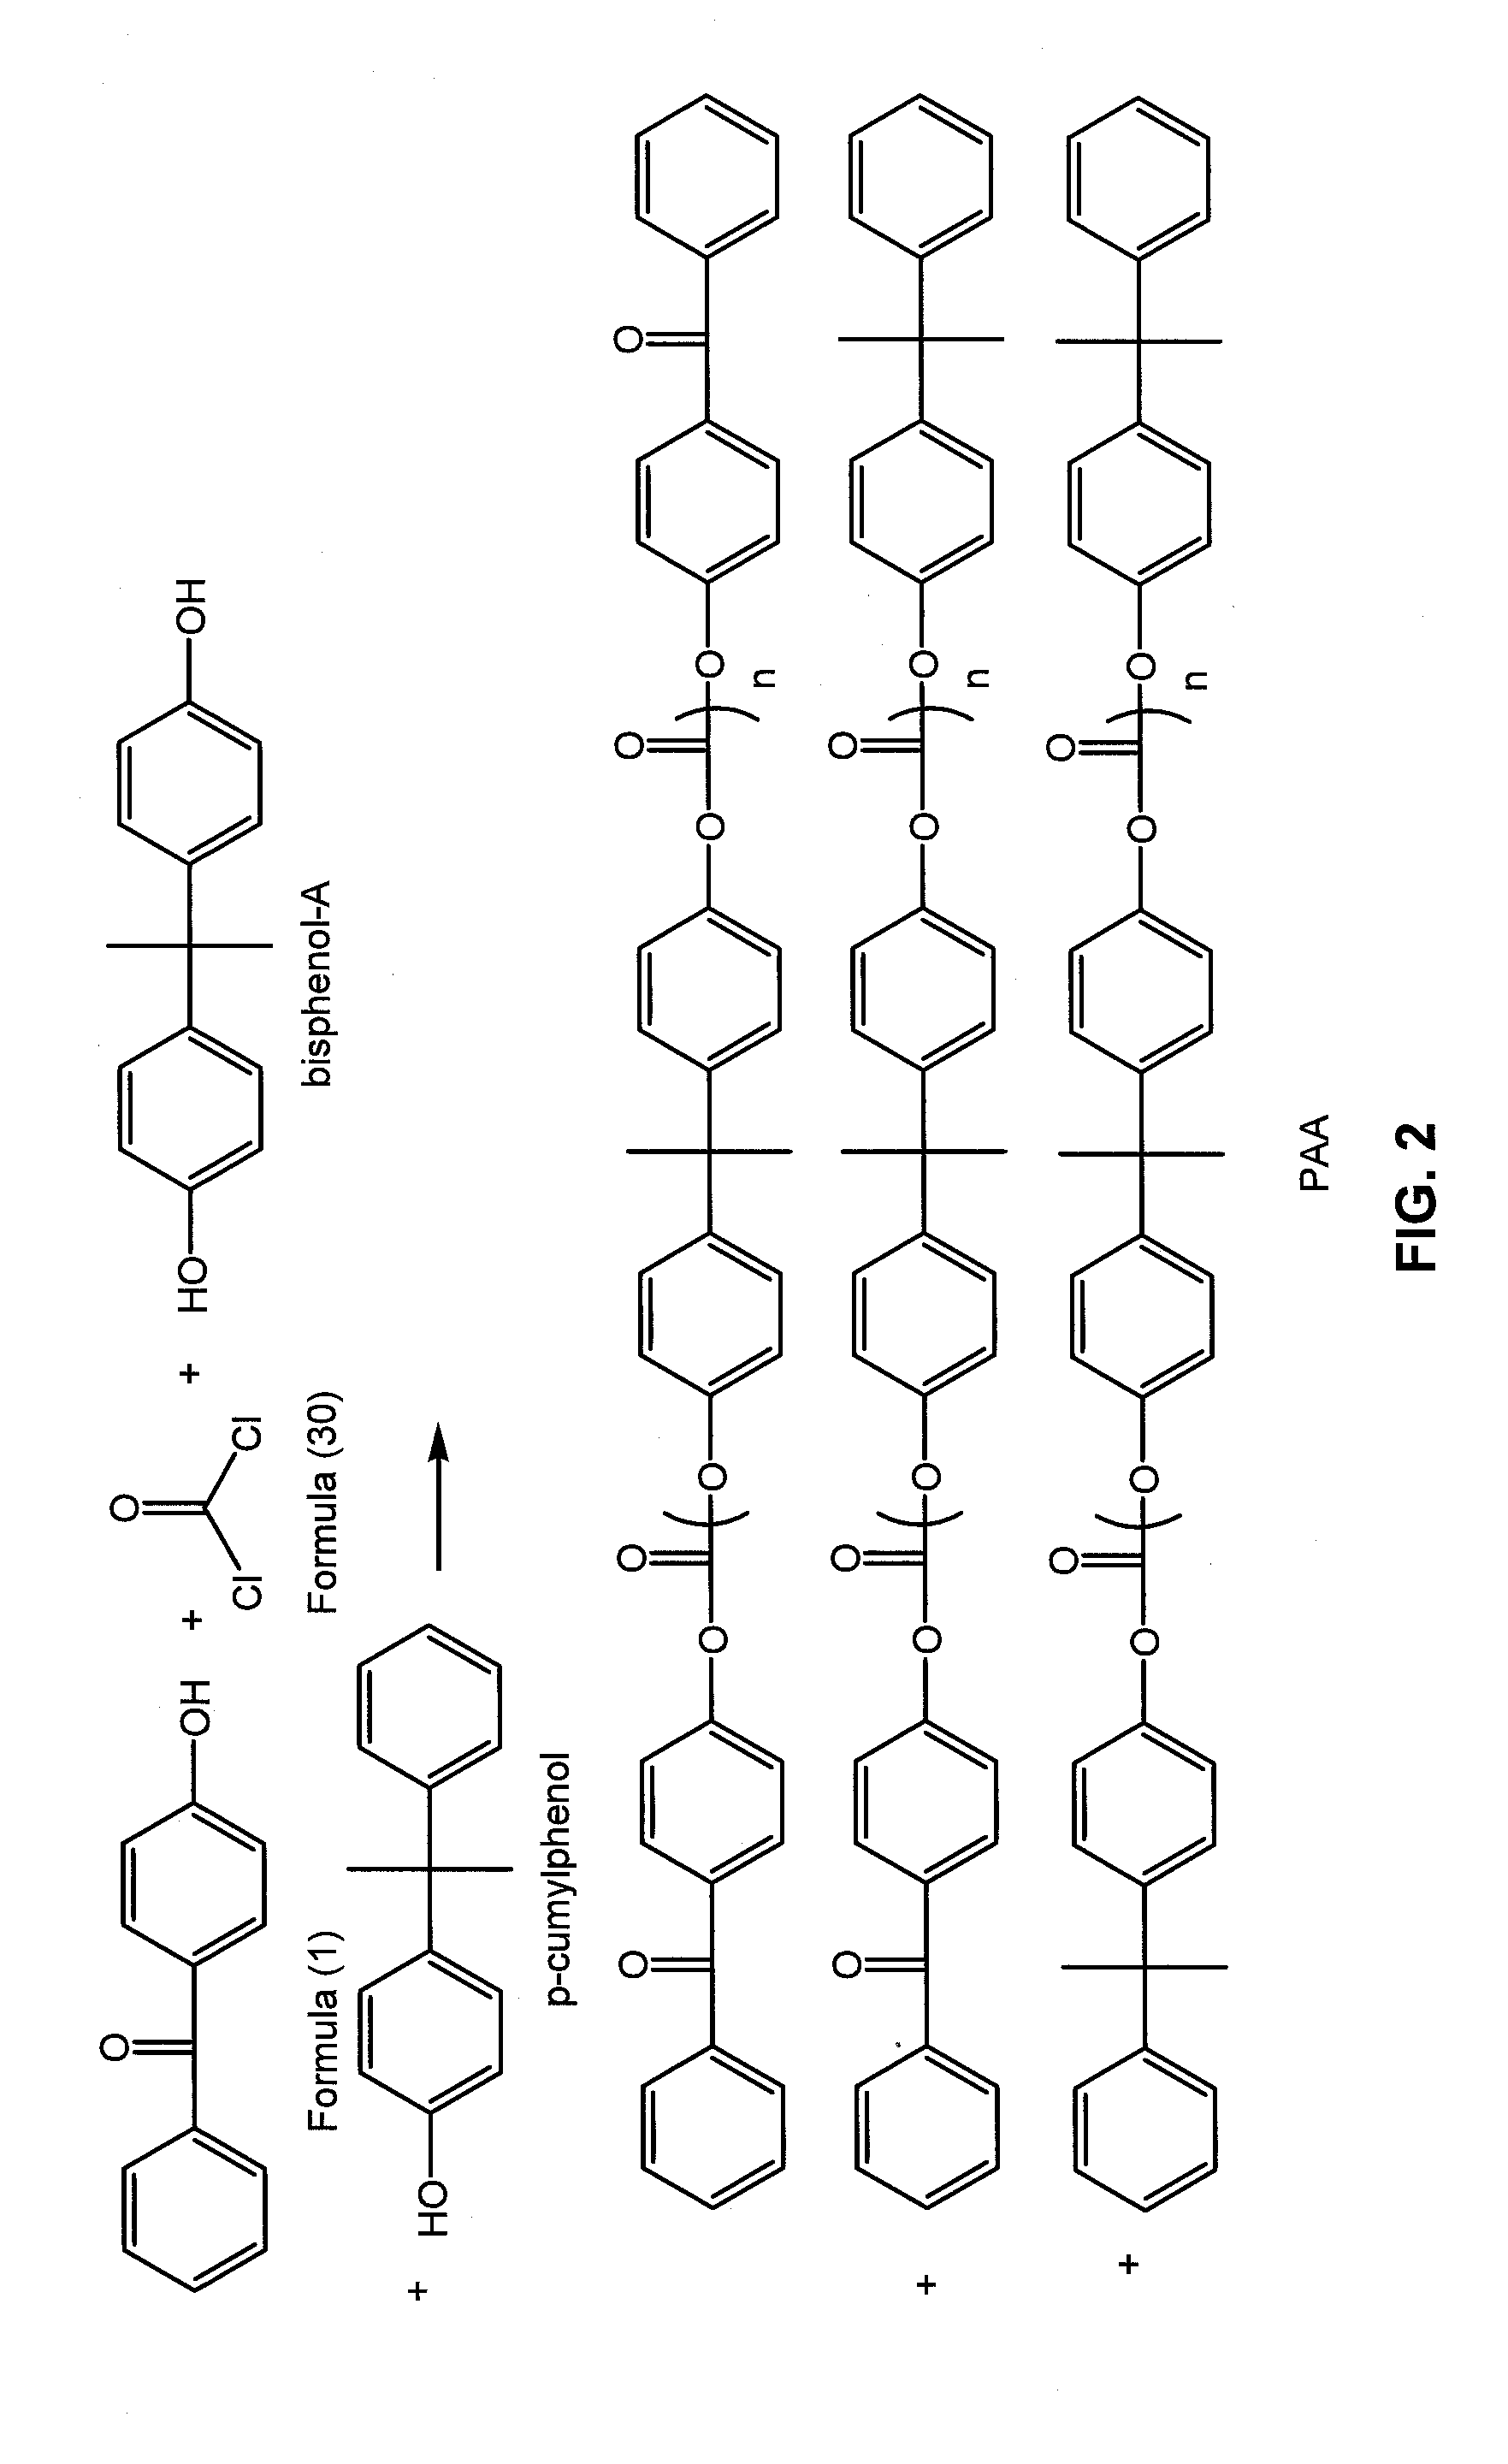 Cross-linked polycarbonate resin with improved chemical and flame resistance